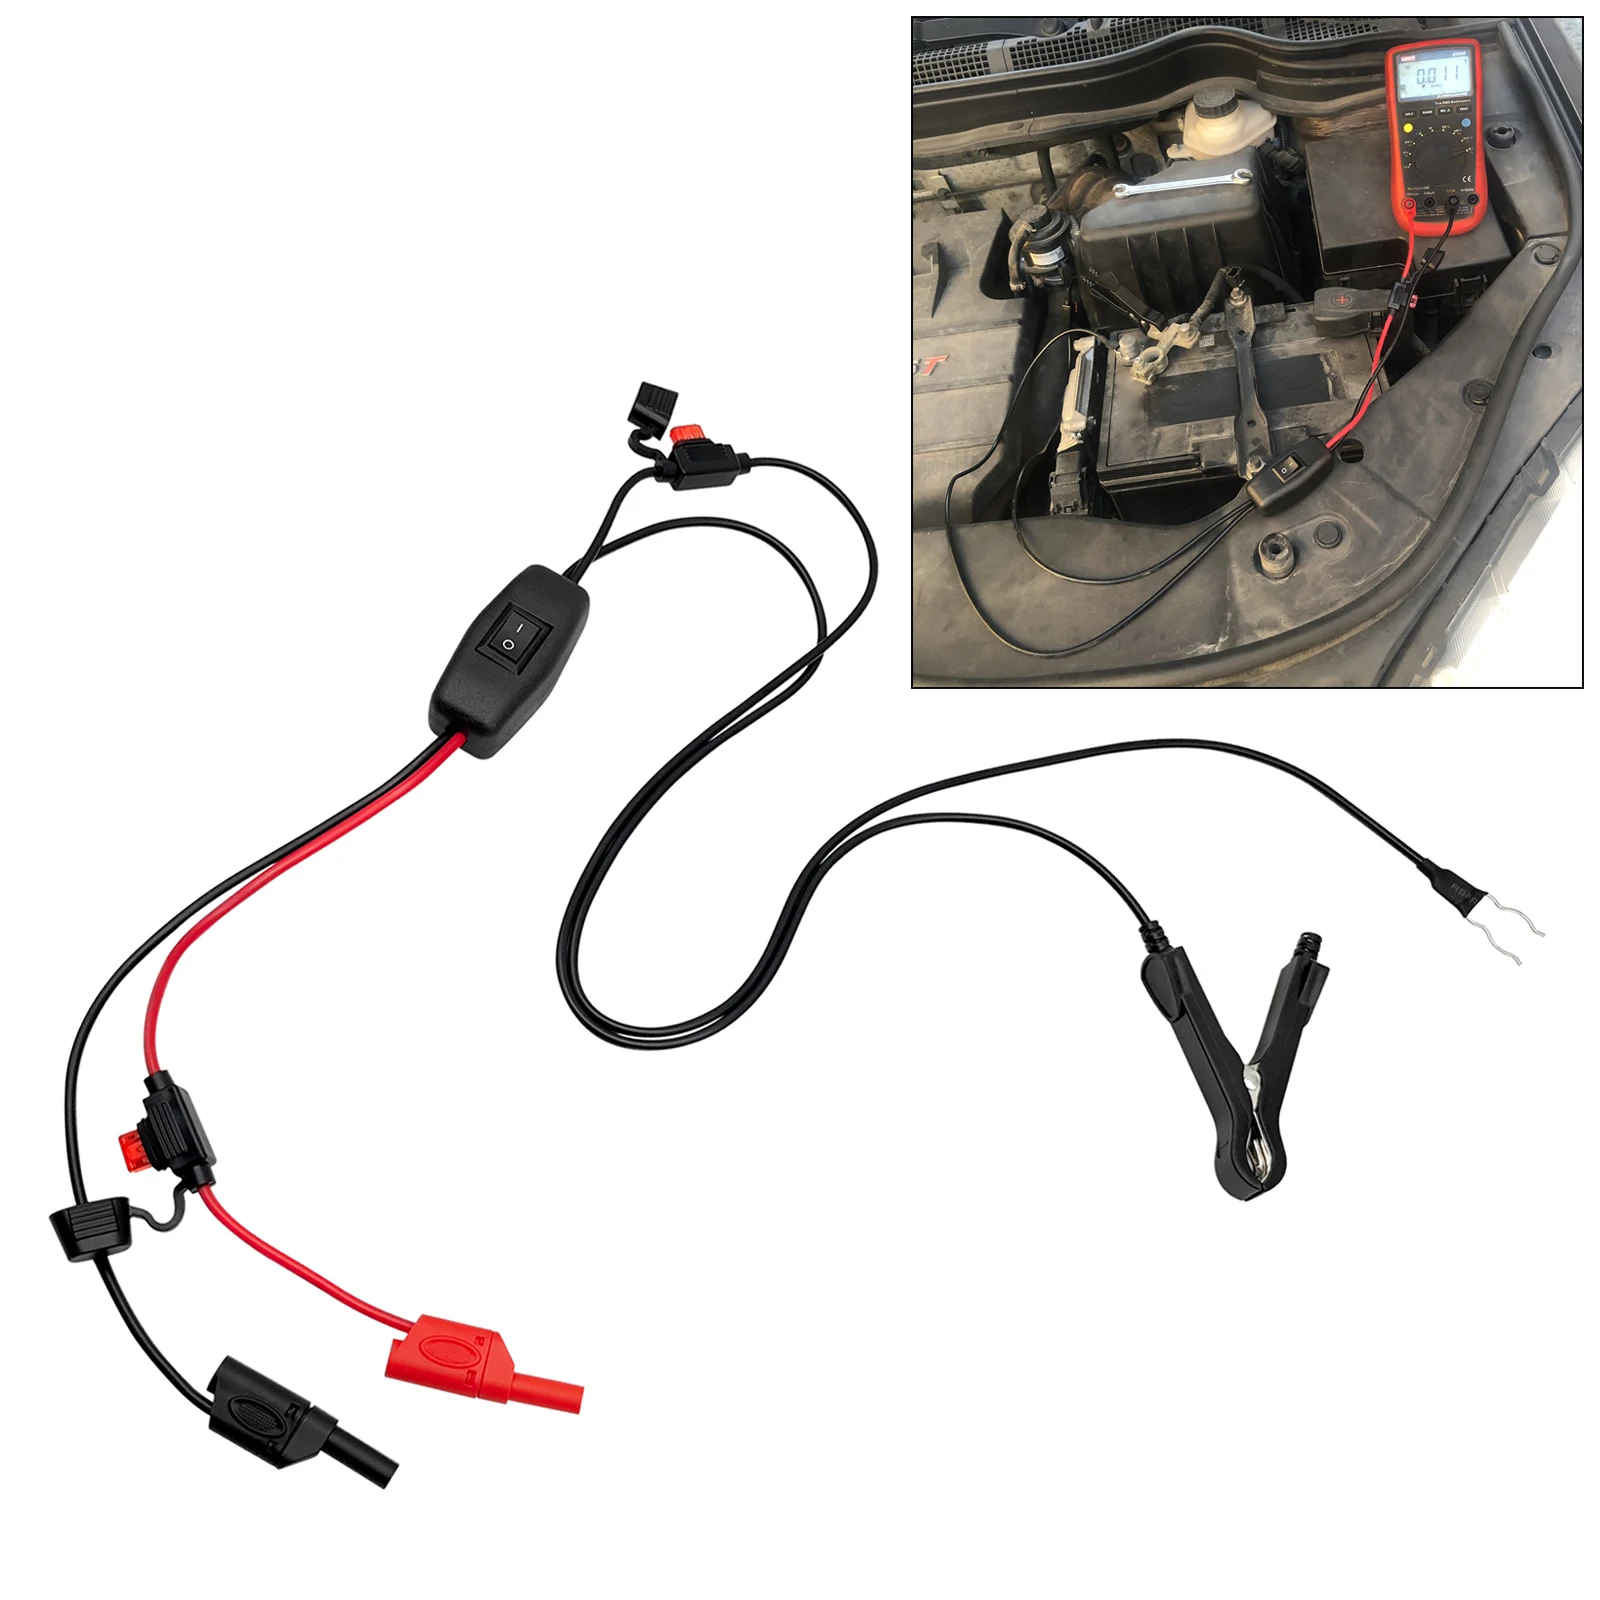  Drain  Circuit    Voltage  Tool Automotive Battery Test,  of  